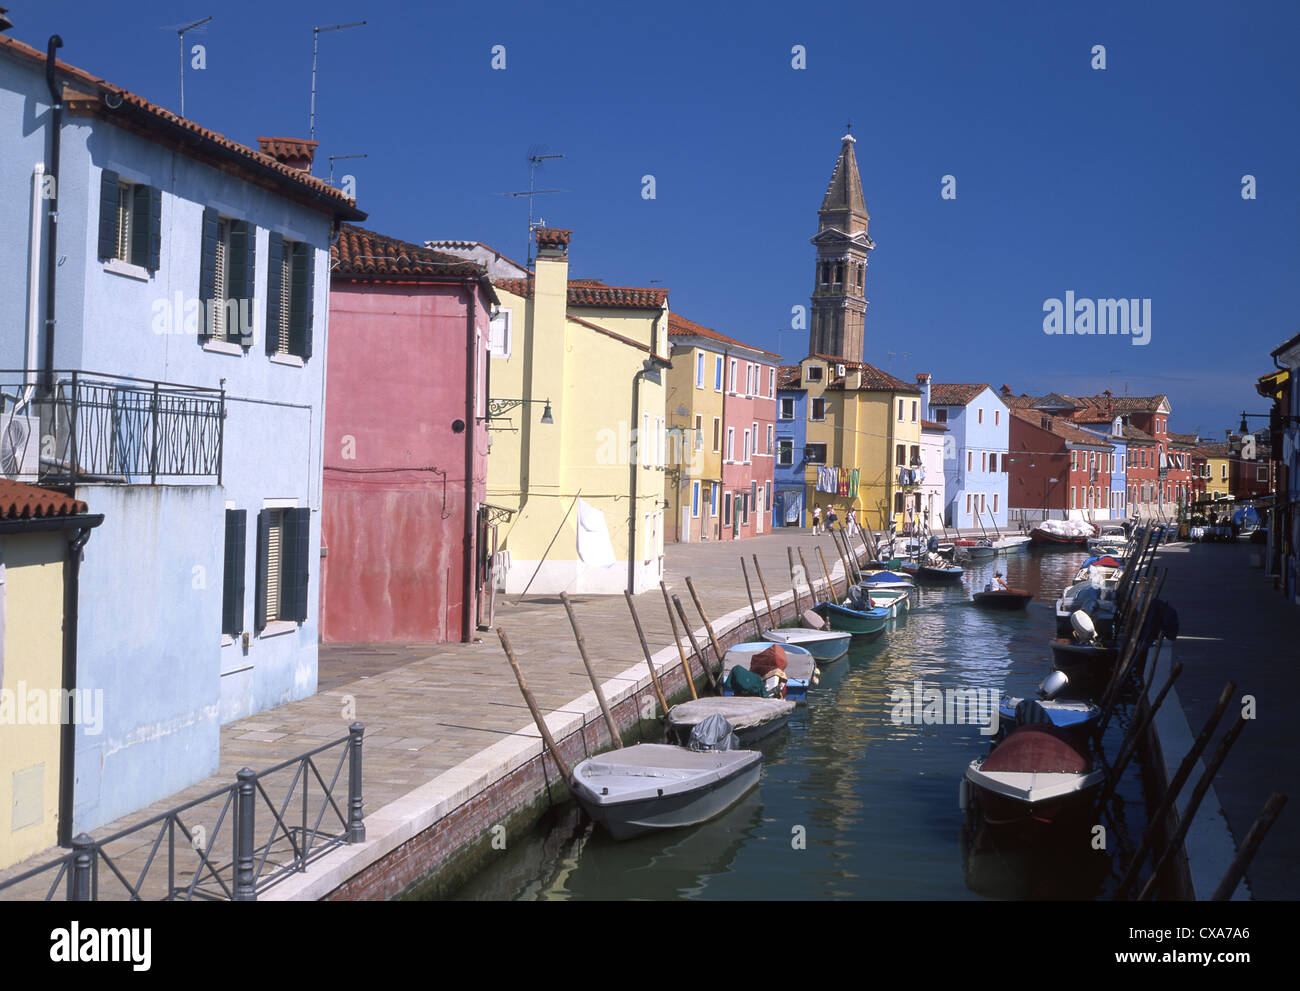 Burano San Martino Church and canal with typical colourful houses and boats Venetian lagoon Venice Veneto Italy Stock Photo